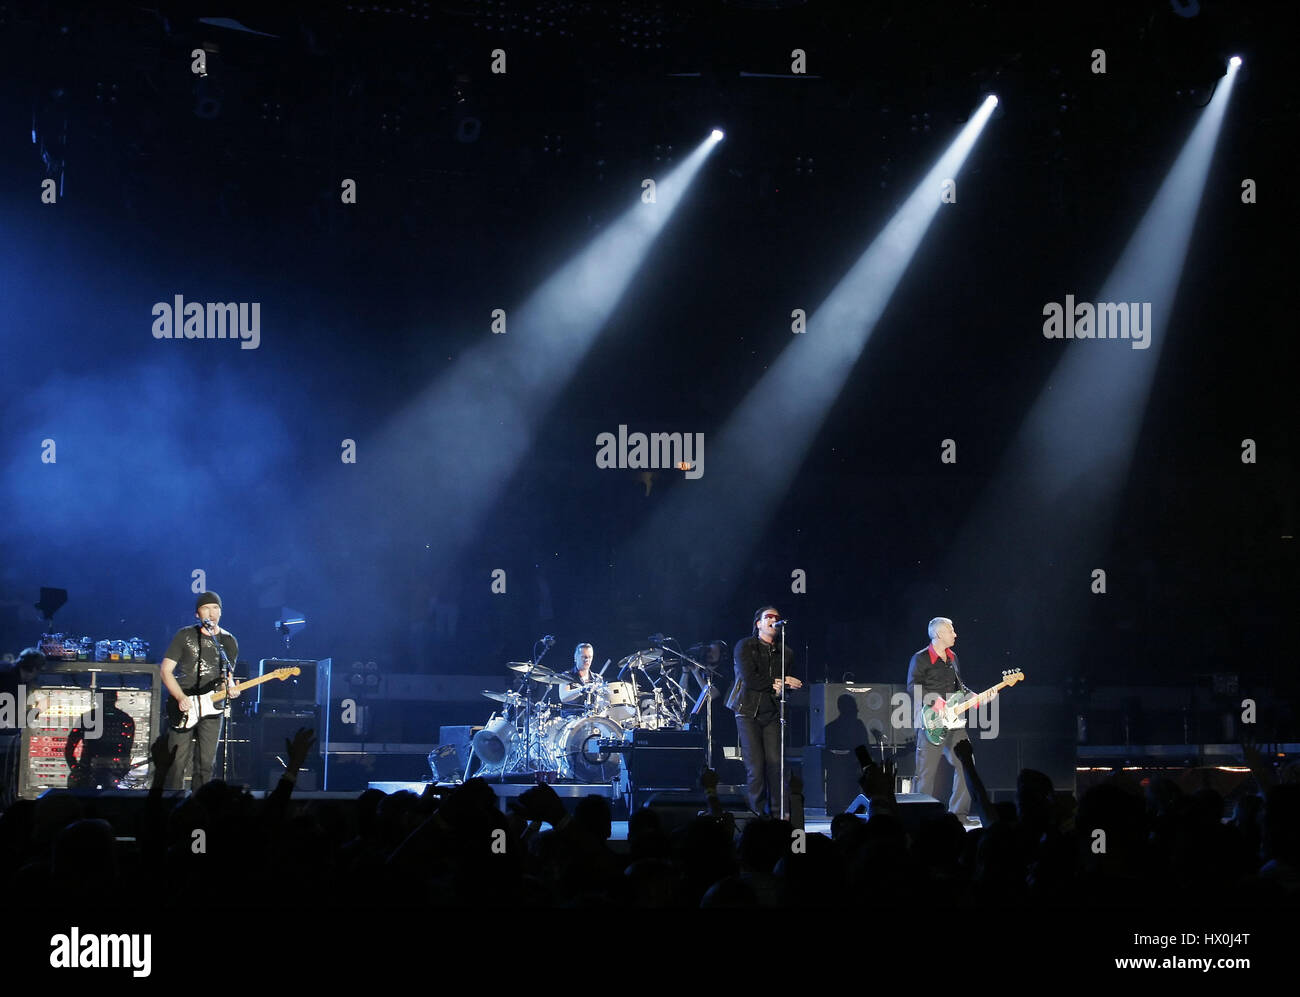 The rock group, U2,  in concert in San Diego, CA on March 28 2005 Photo credit: Francis Specker Stock Photo